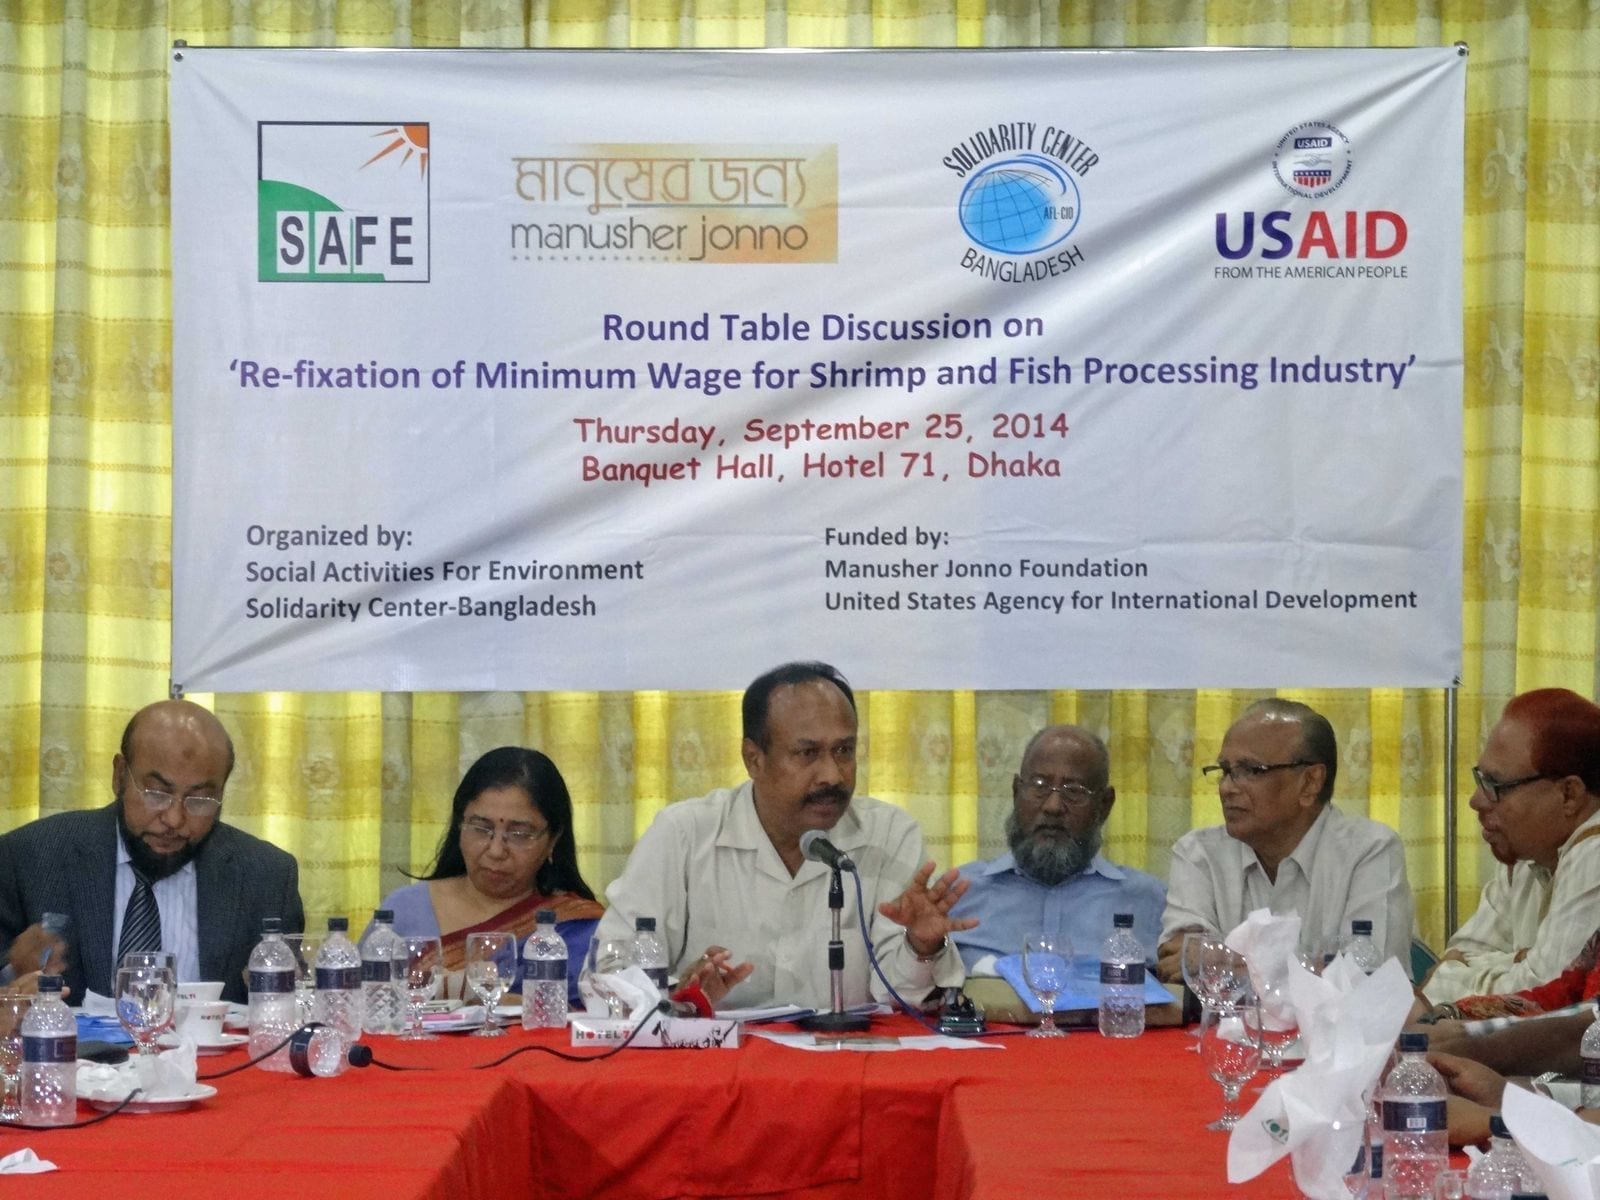 high-level meeting to look into raising the wages of Bangladeshi shrimp workers